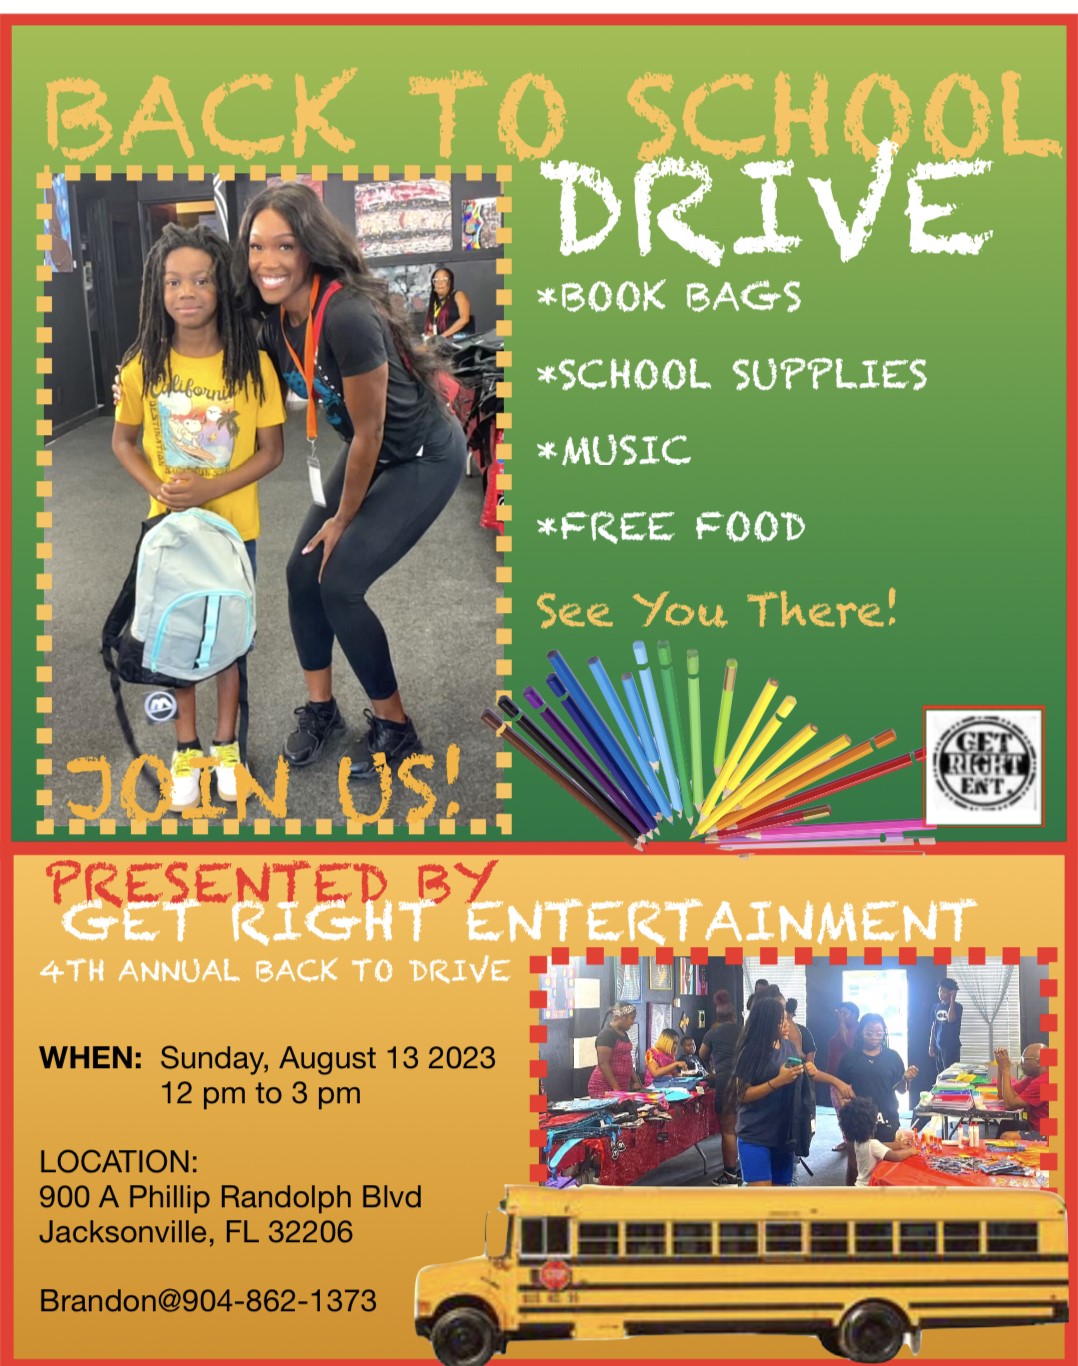 School Supplies Will Be Available Free at 'Back to School Giveaway